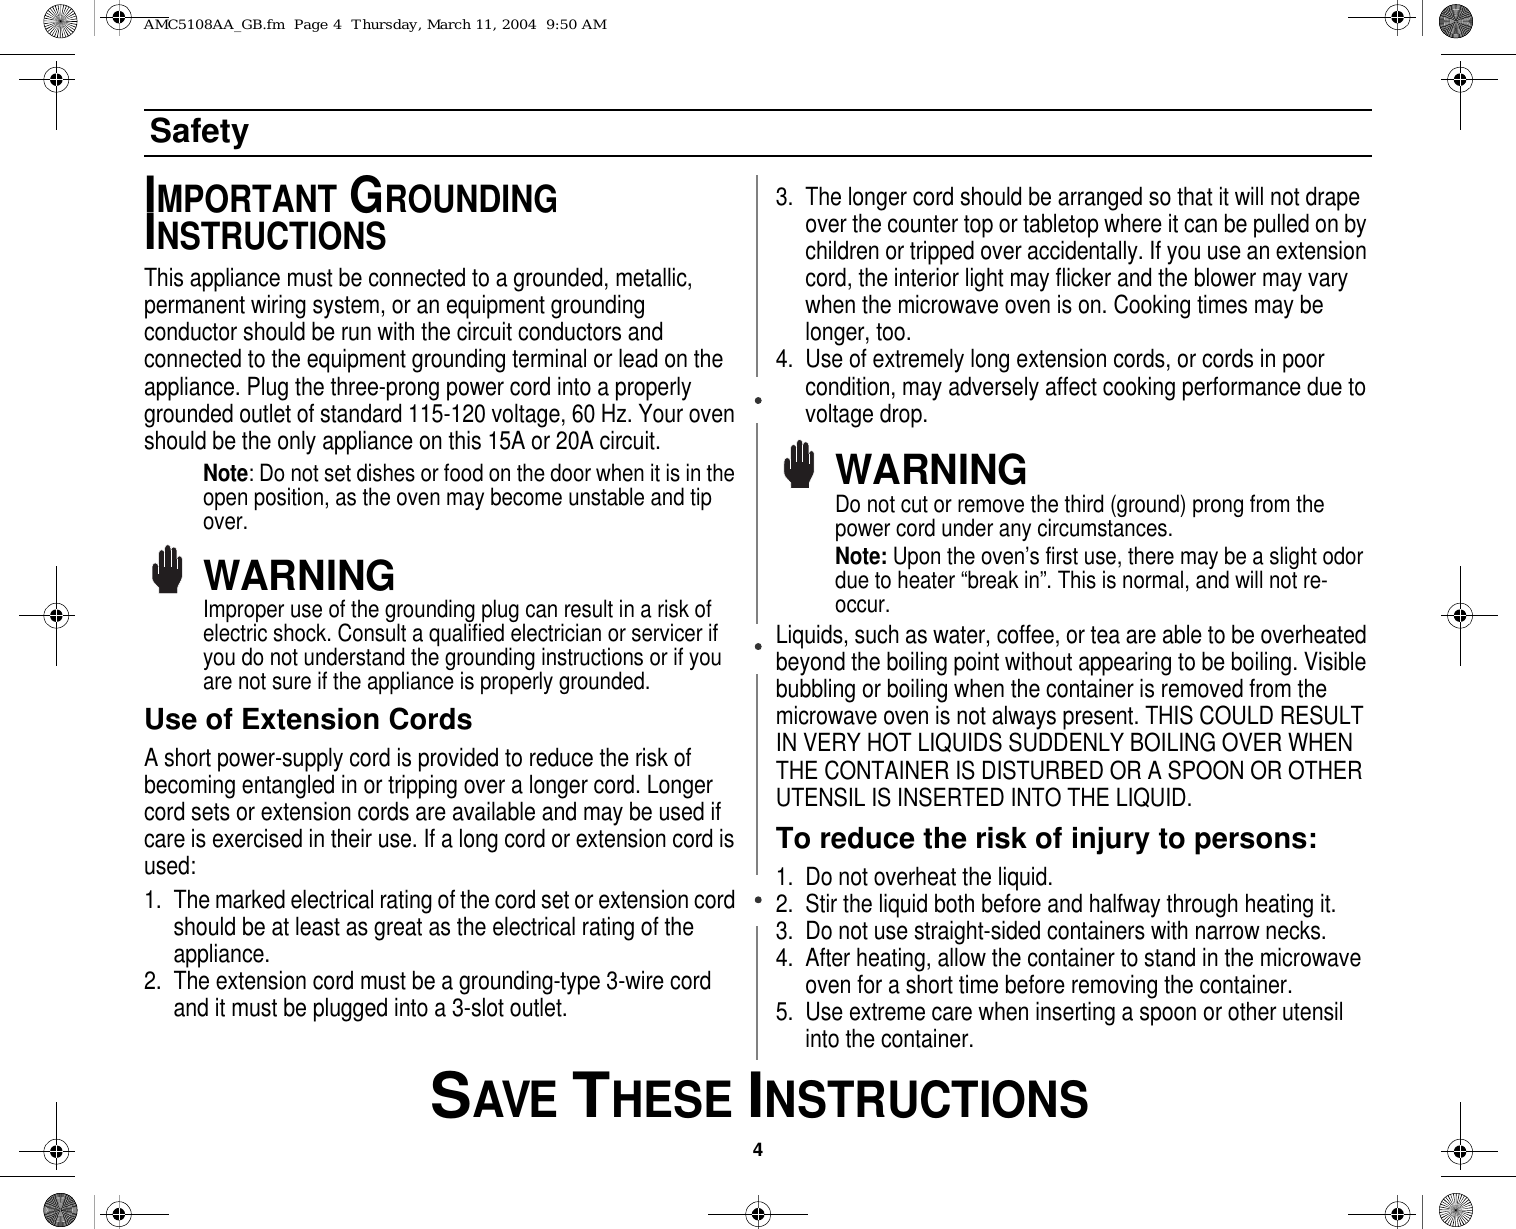 4 SAVE THESE INSTRUCTIONSSafetyIMPORTANT GROUNDING INSTRUCTIONSThis appliance must be connected to a grounded, metallic, permanent wiring system, or an equipment grounding conductor should be run with the circuit conductors and connected to the equipment grounding terminal or lead on the appliance. Plug the three-prong power cord into a properly grounded outlet of standard 115-120 voltage, 60 Hz. Your oven should be the only appliance on this 15A or 20A circuit.Note: Do not set dishes or food on the door when it is in the open position, as the oven may become unstable and tip over.WARNINGImproper use of the grounding plug can result in a risk of electric shock. Consult a qualified electrician or servicer if you do not understand the grounding instructions or if you are not sure if the appliance is properly grounded.Use of Extension Cords A short power-supply cord is provided to reduce the risk of becoming entangled in or tripping over a longer cord. Longer cord sets or extension cords are available and may be used if care is exercised in their use. If a long cord or extension cord is used:1. The marked electrical rating of the cord set or extension cord should be at least as great as the electrical rating of the appliance.2. The extension cord must be a grounding-type 3-wire cord and it must be plugged into a 3-slot outlet. 3. The longer cord should be arranged so that it will not drape over the counter top or tabletop where it can be pulled on by children or tripped over accidentally. If you use an extension cord, the interior light may flicker and the blower may vary when the microwave oven is on. Cooking times may be longer, too.4. Use of extremely long extension cords, or cords in poor condition, may adversely affect cooking performance due to voltage drop.WARNINGDo not cut or remove the third (ground) prong from the power cord under any circumstances.Note: Upon the oven’s first use, there may be a slight odor due to heater “break in”. This is normal, and will not re-occur.Liquids, such as water, coffee, or tea are able to be overheated beyond the boiling point without appearing to be boiling. Visible bubbling or boiling when the container is removed from the microwave oven is not always present. THIS COULD RESULT IN VERY HOT LIQUIDS SUDDENLY BOILING OVER WHEN THE CONTAINER IS DISTURBED OR A SPOON OR OTHER UTENSIL IS INSERTED INTO THE LIQUID.To reduce the risk of injury to persons:1. Do not overheat the liquid.2. Stir the liquid both before and halfway through heating it.3. Do not use straight-sided containers with narrow necks.4. After heating, allow the container to stand in the microwave oven for a short time before removing the container.5. Use extreme care when inserting a spoon or other utensil into the container.AMC5108AA_GB.fm  Page 4  Thursday, March 11, 2004  9:50 AM